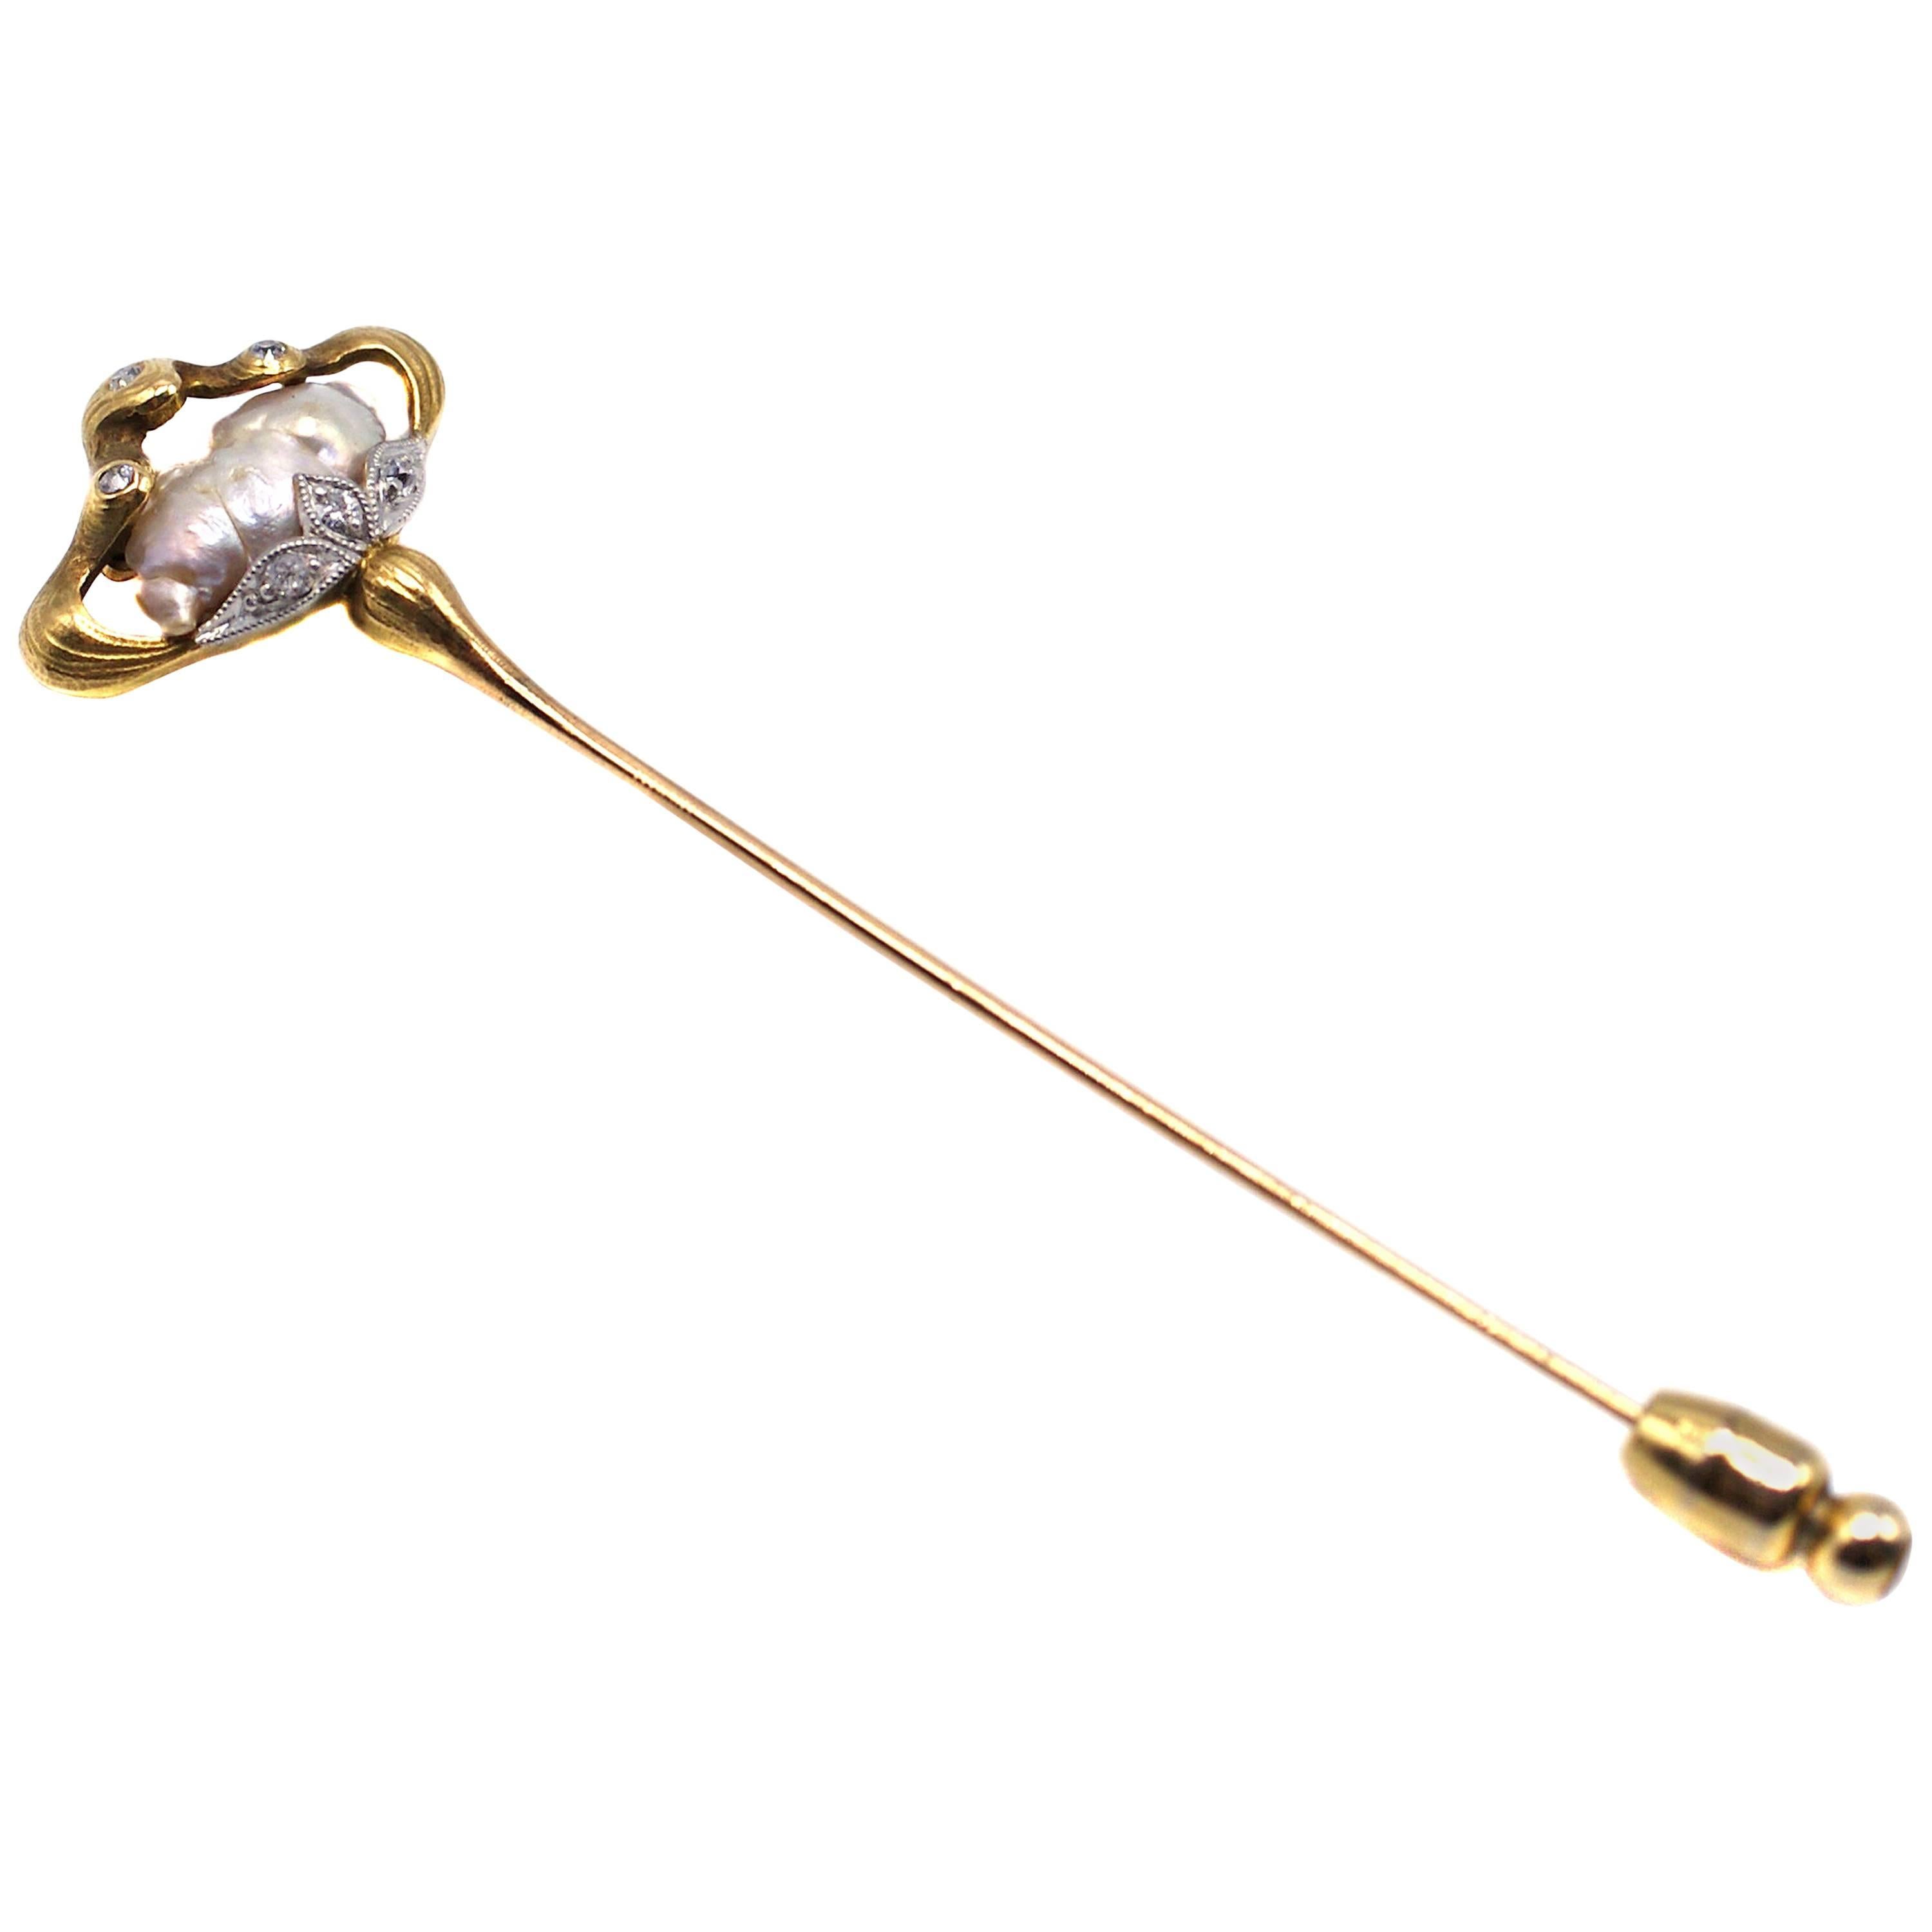 Spaulding & Co Belle Epoque Gold Diamond and Pearl Stick Pin